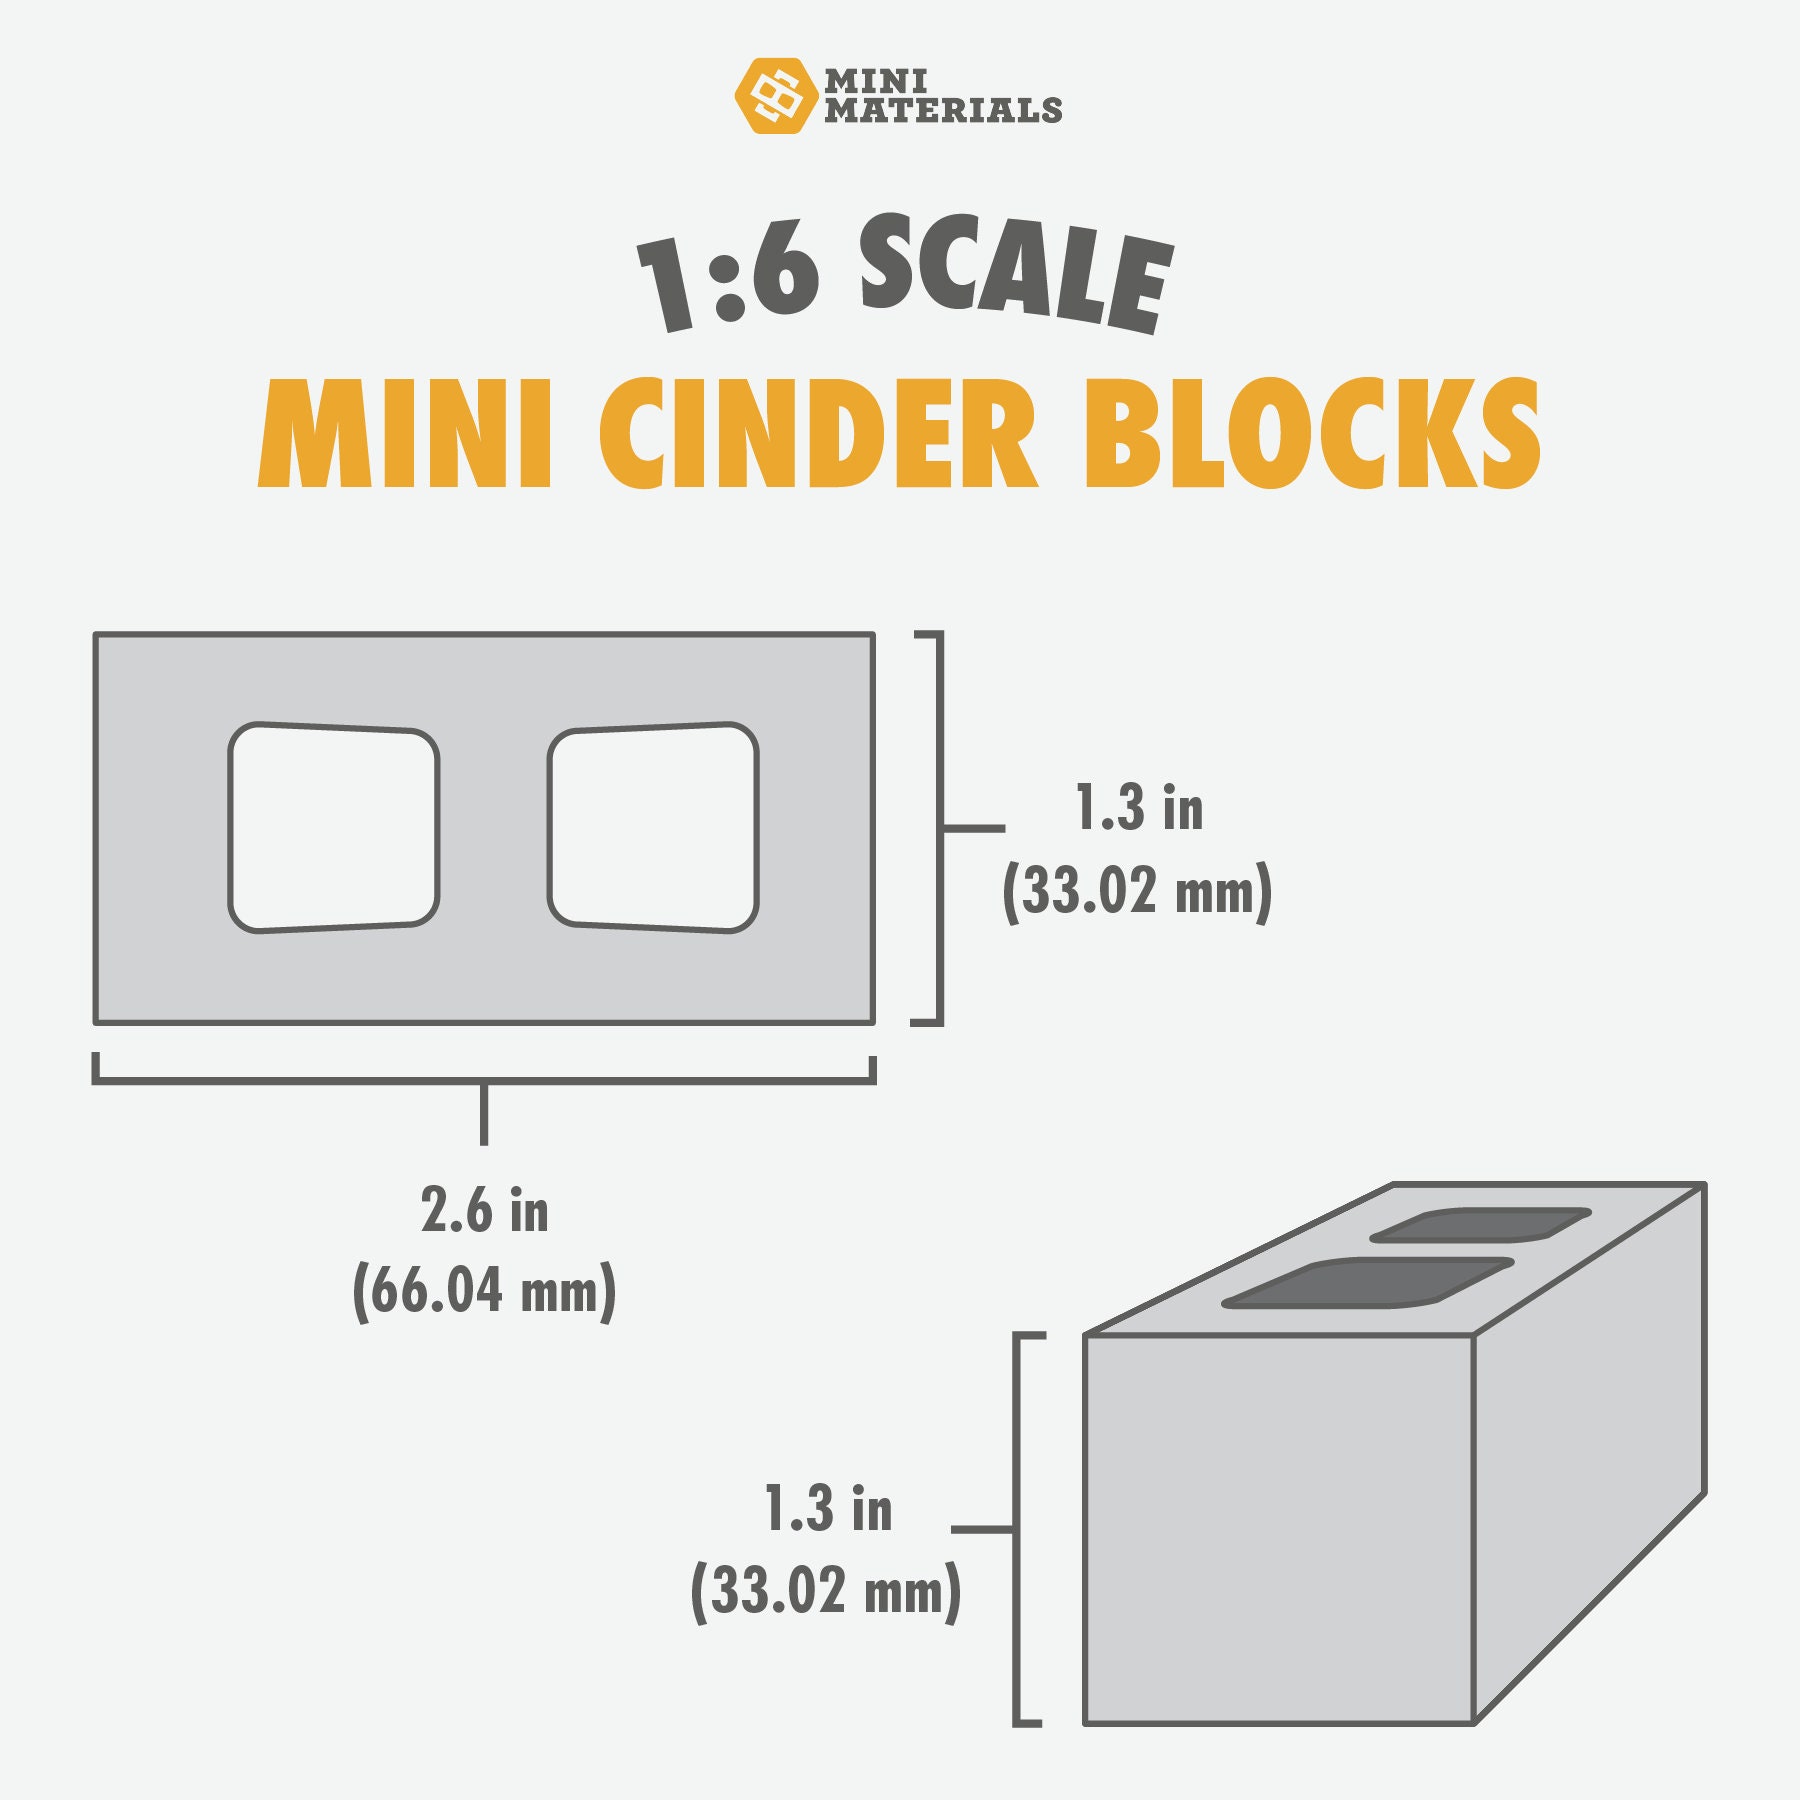 Silicone mold form for 20 miniature cinder blocks 1:24